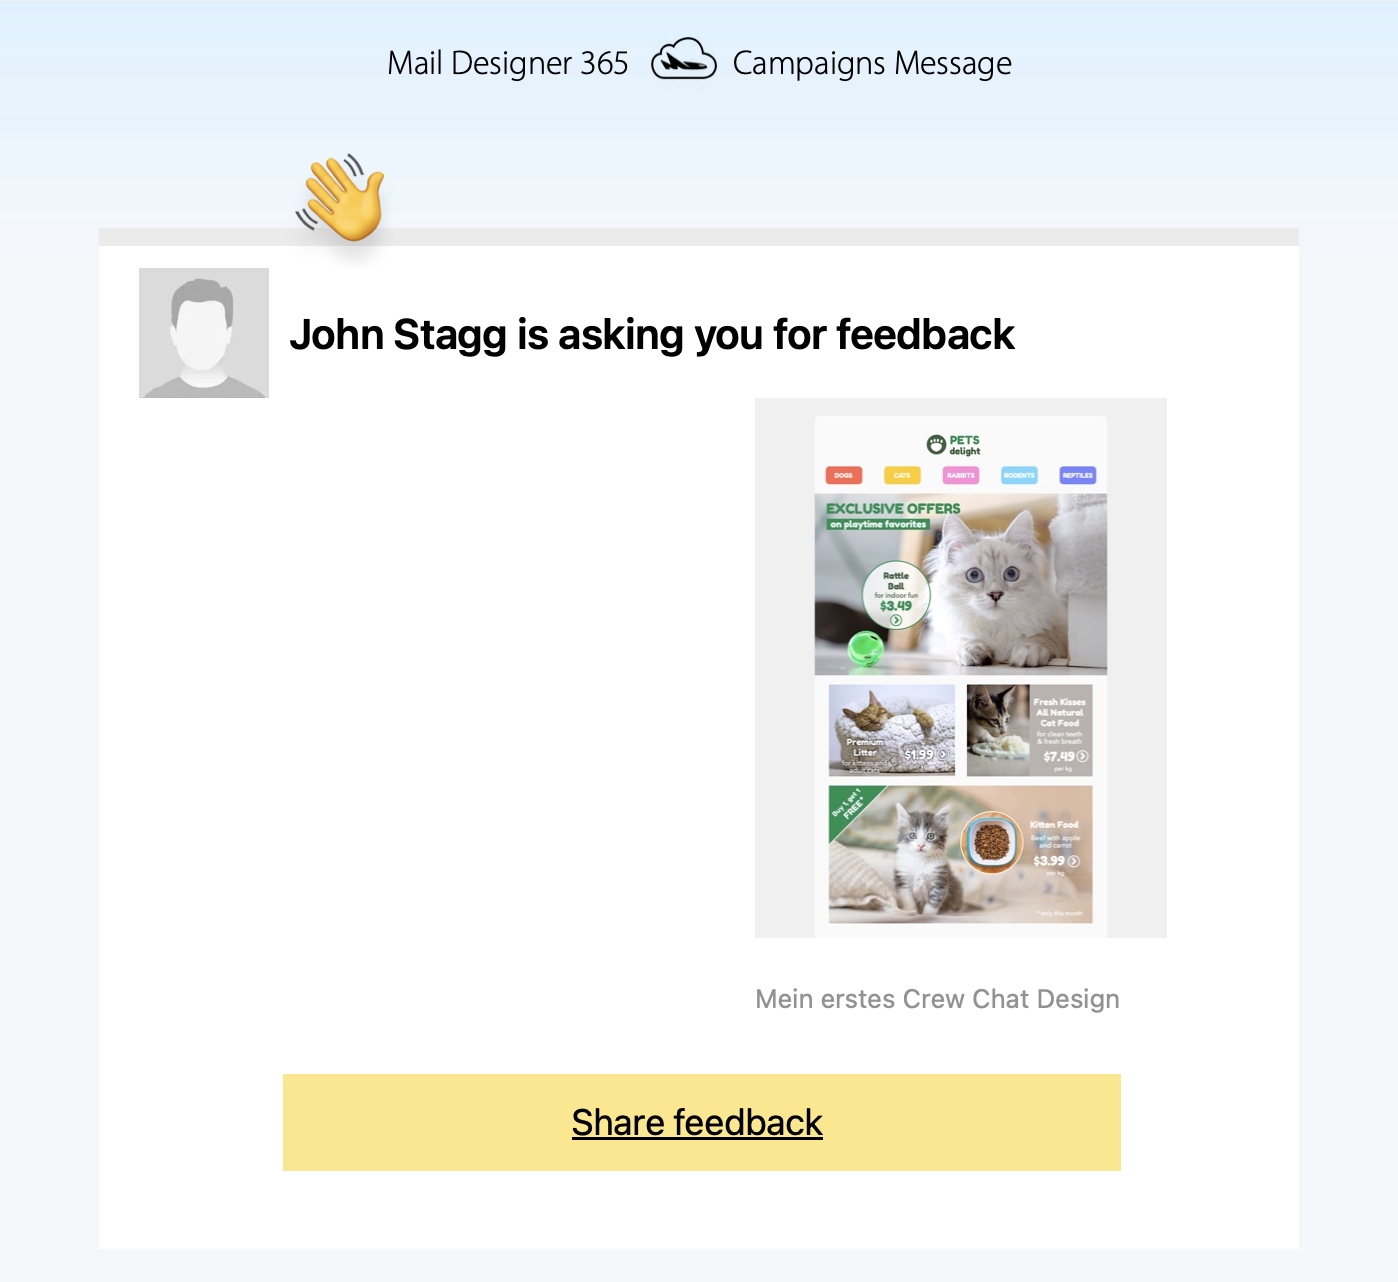 How to Set Up Mail Designer 365 for Your Team